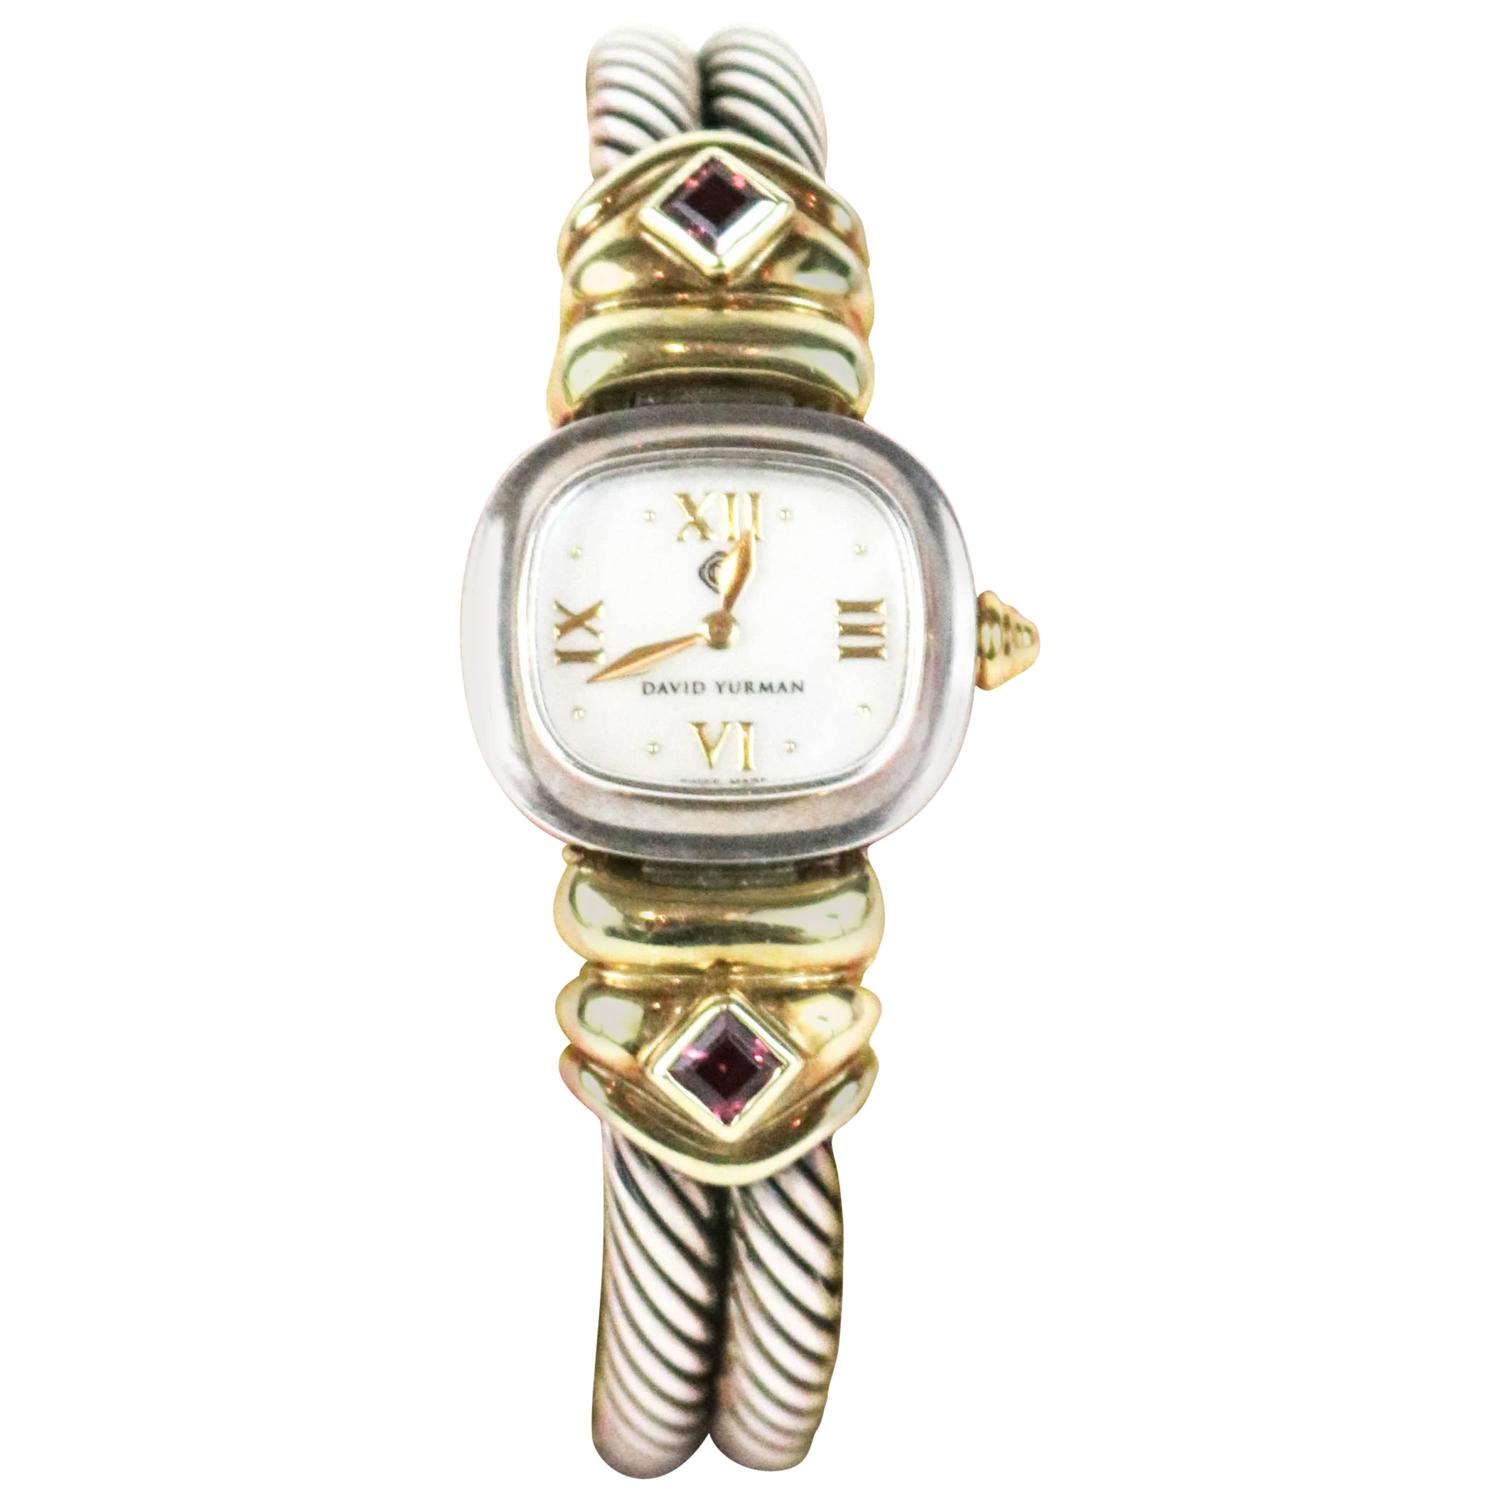  Yurman Dual Cable Gold and Silver Bangle Watch For Sale at 1stdibs